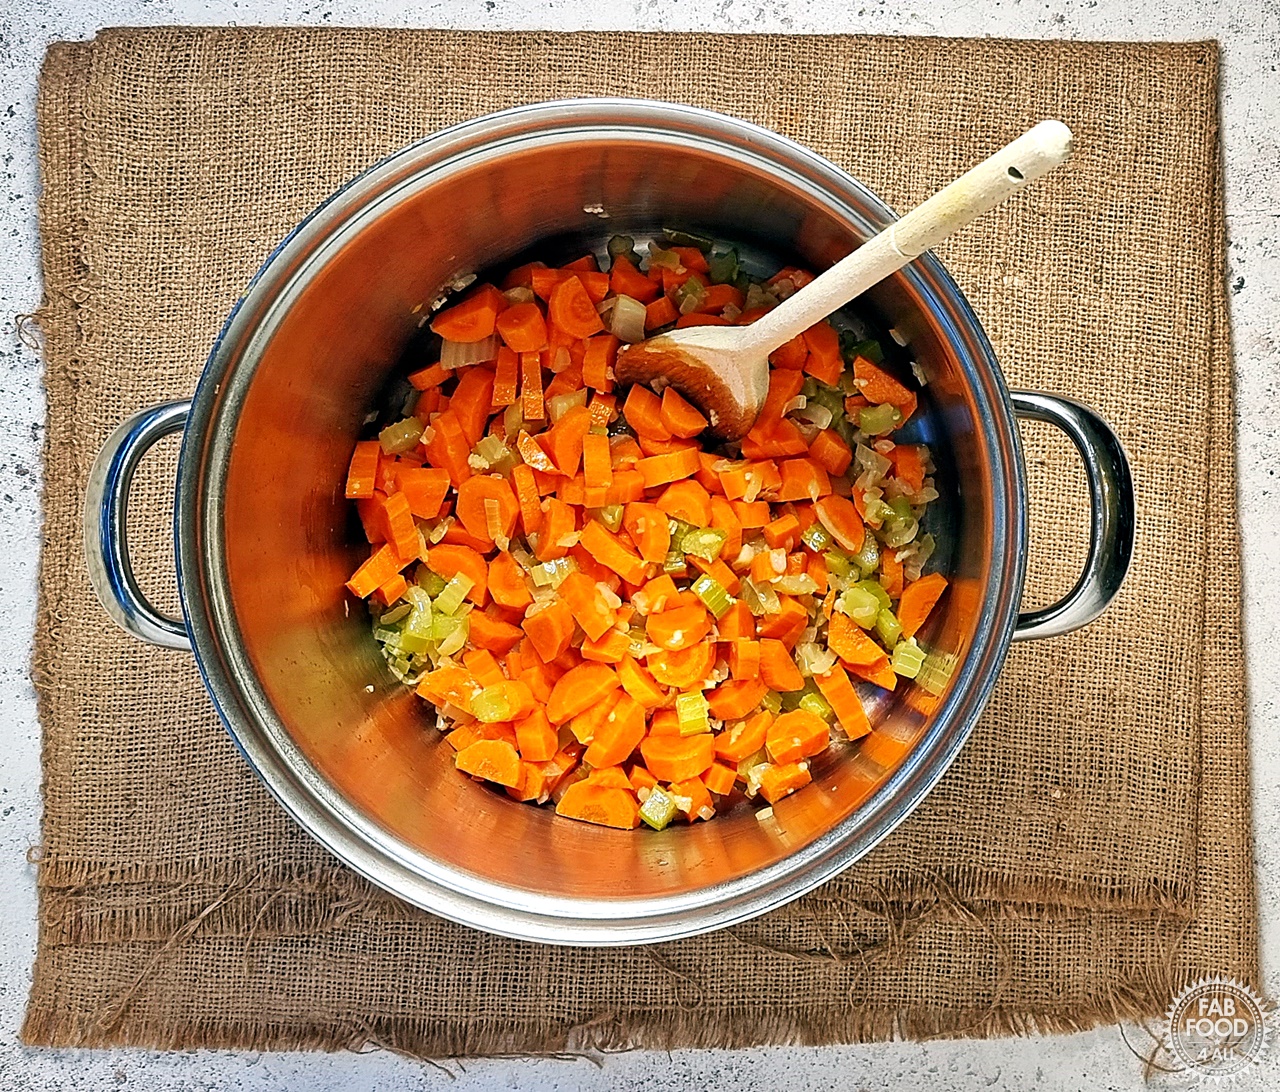 Pan shot with carrots added.